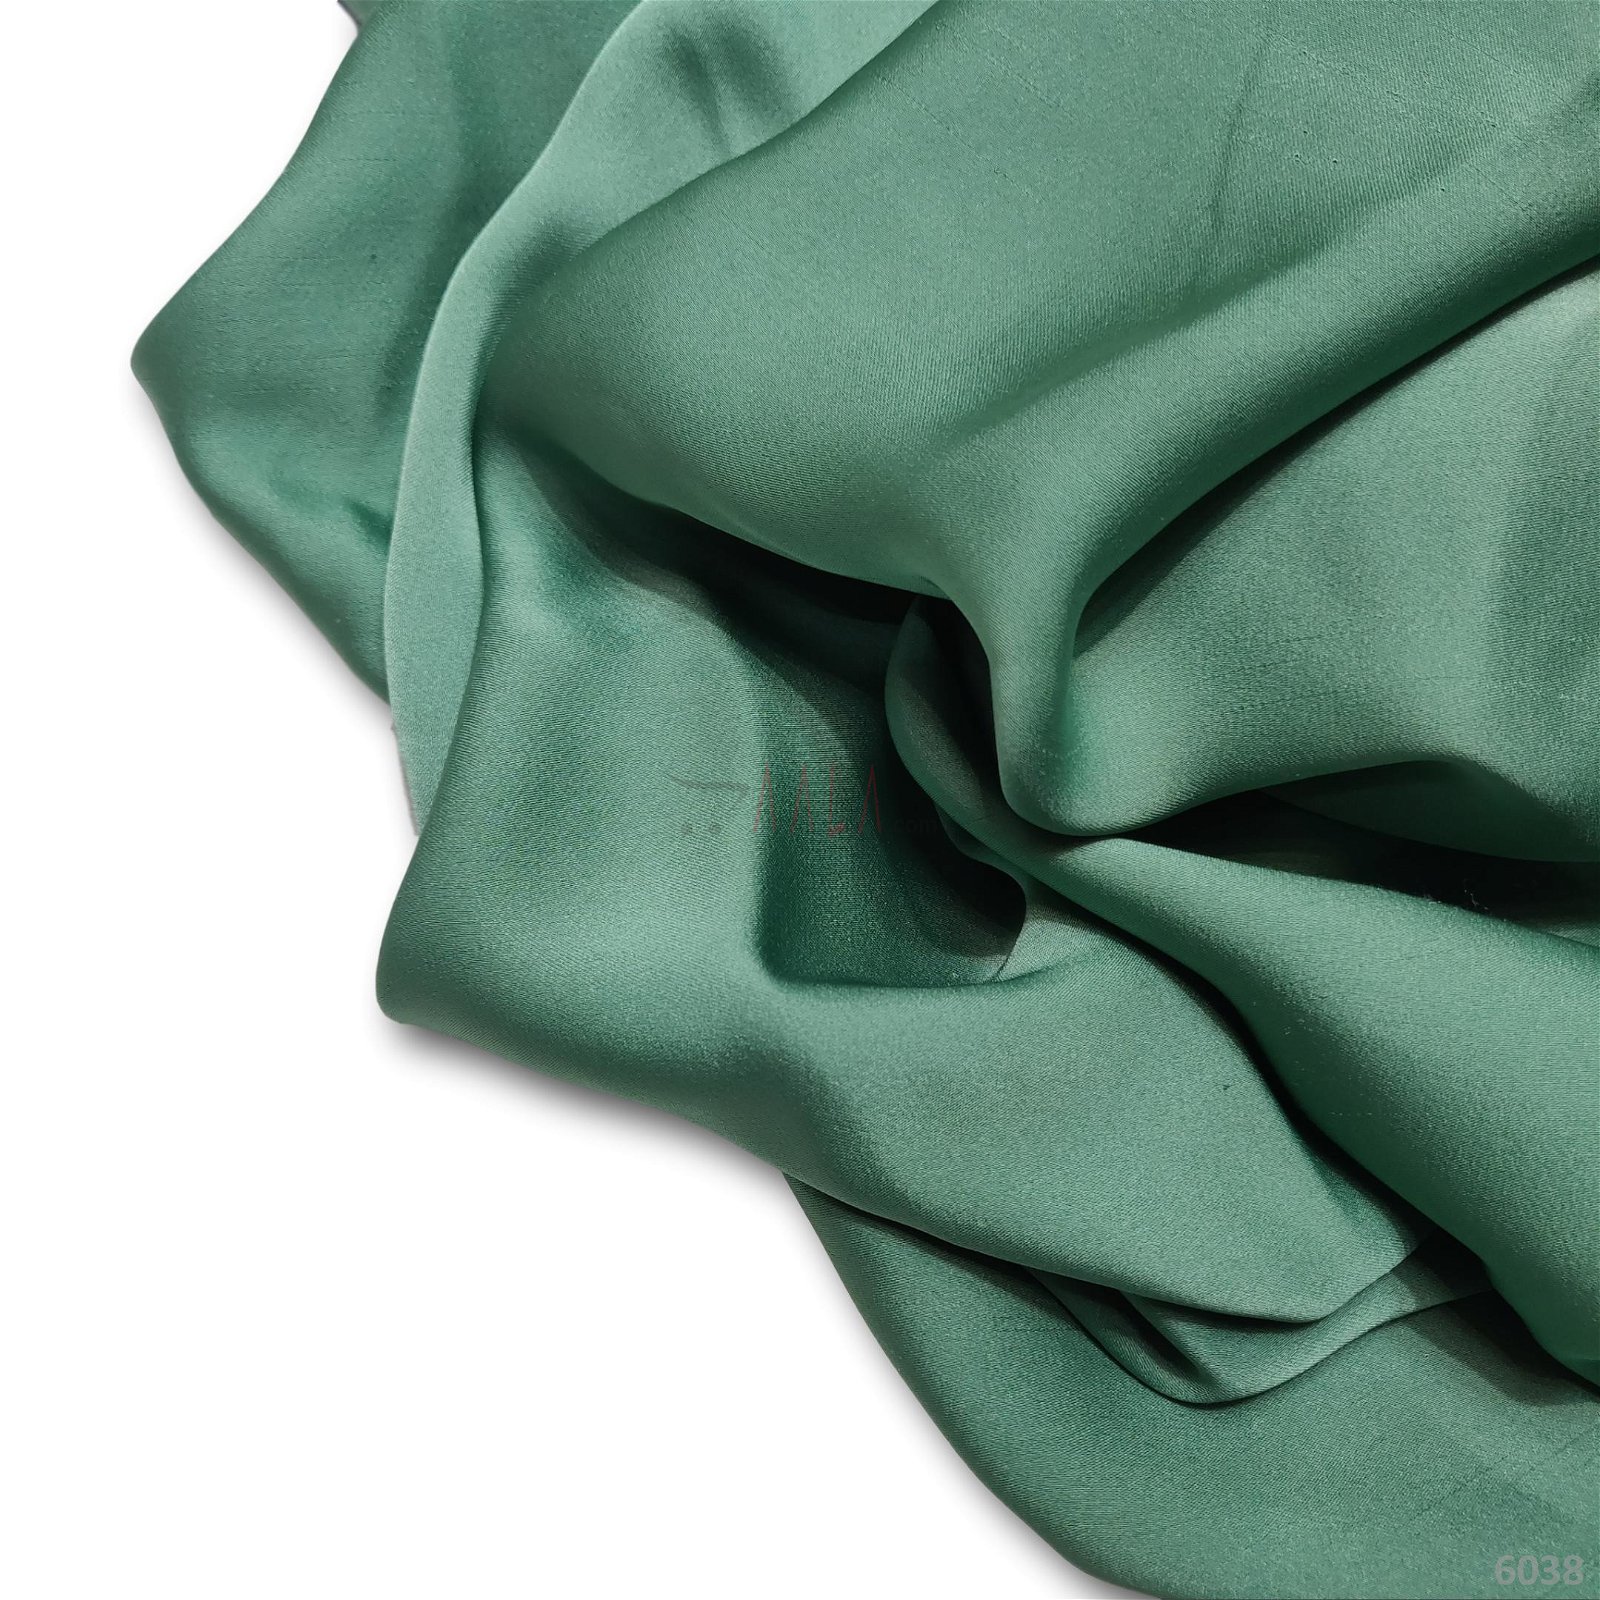 Double Satin Georgette 44 Inches Dyed Per Metre #6038